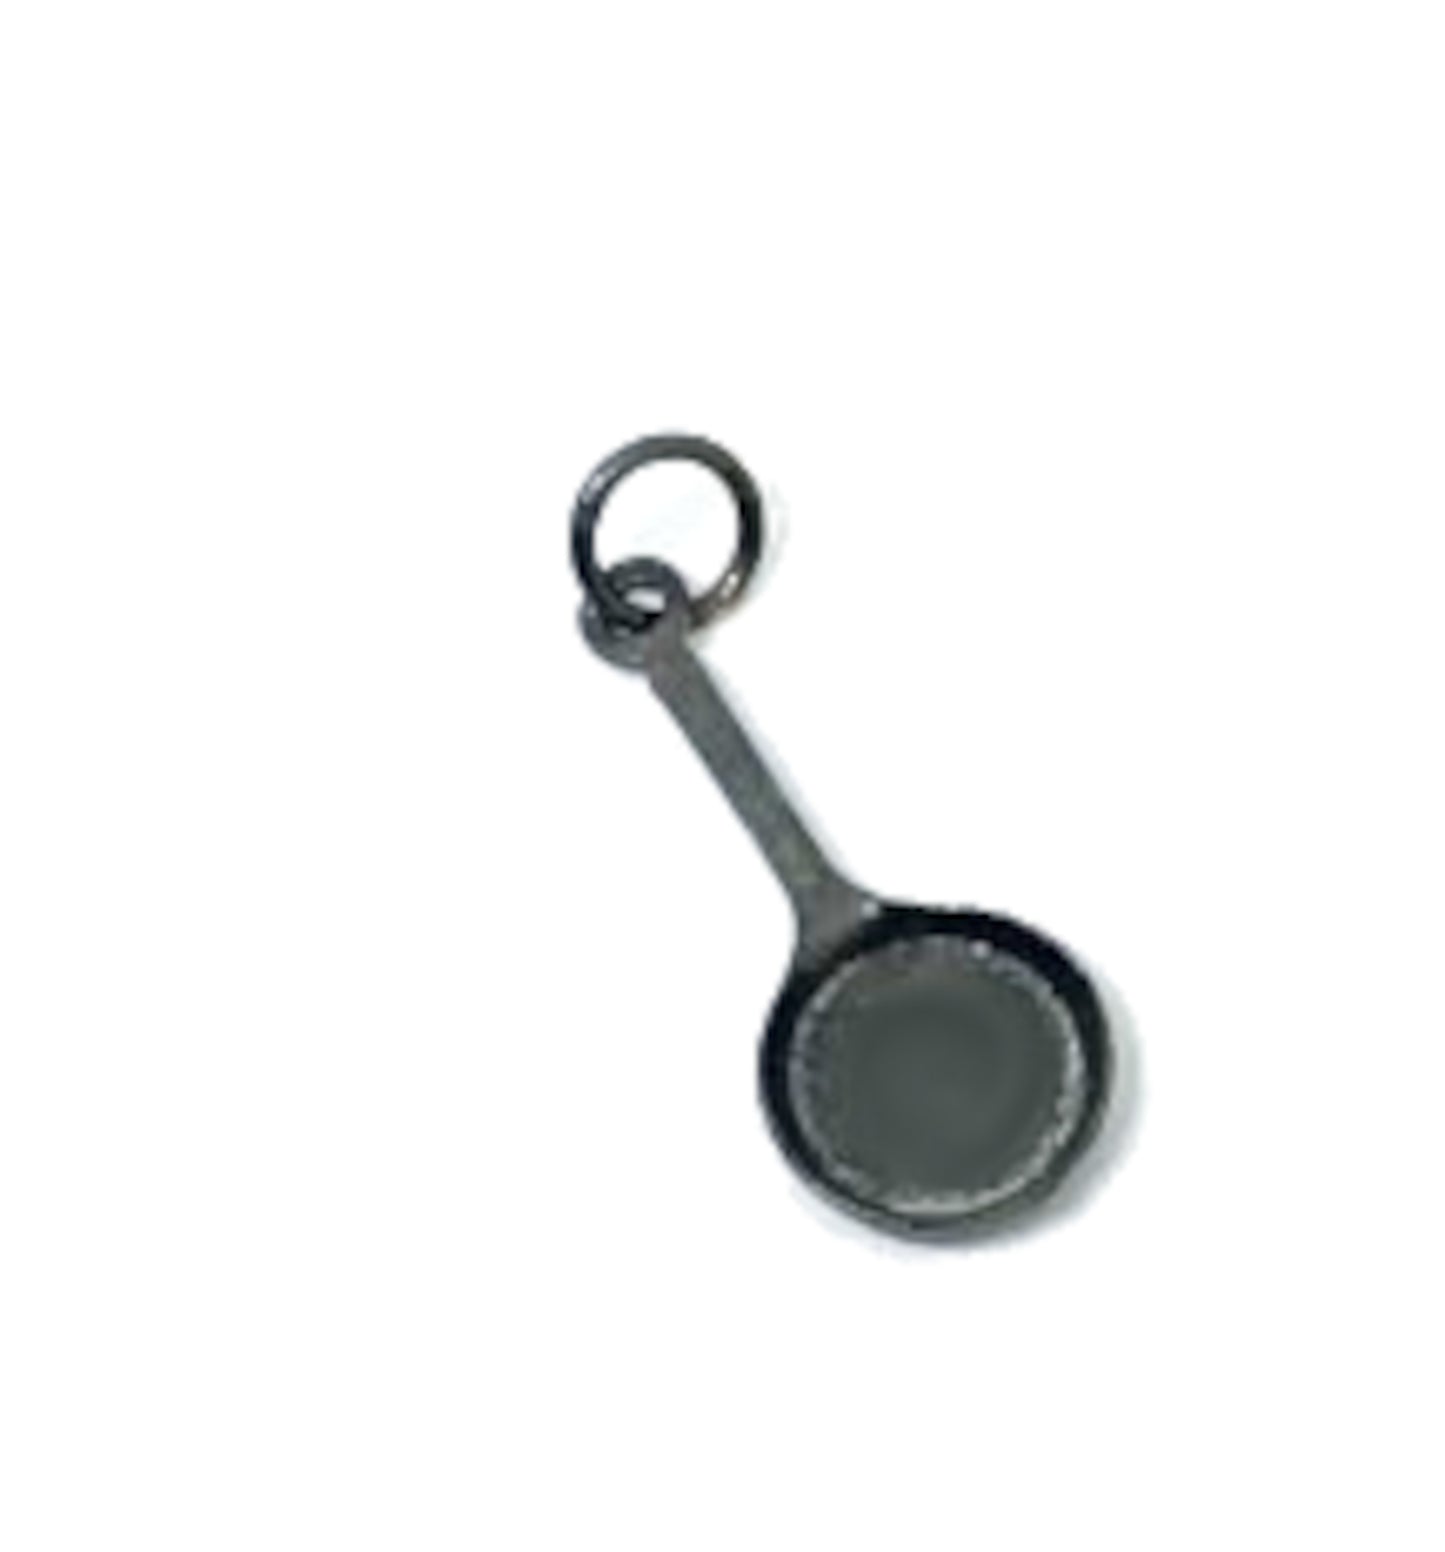 Cast Iron Skillet Charm in Sterling Silver